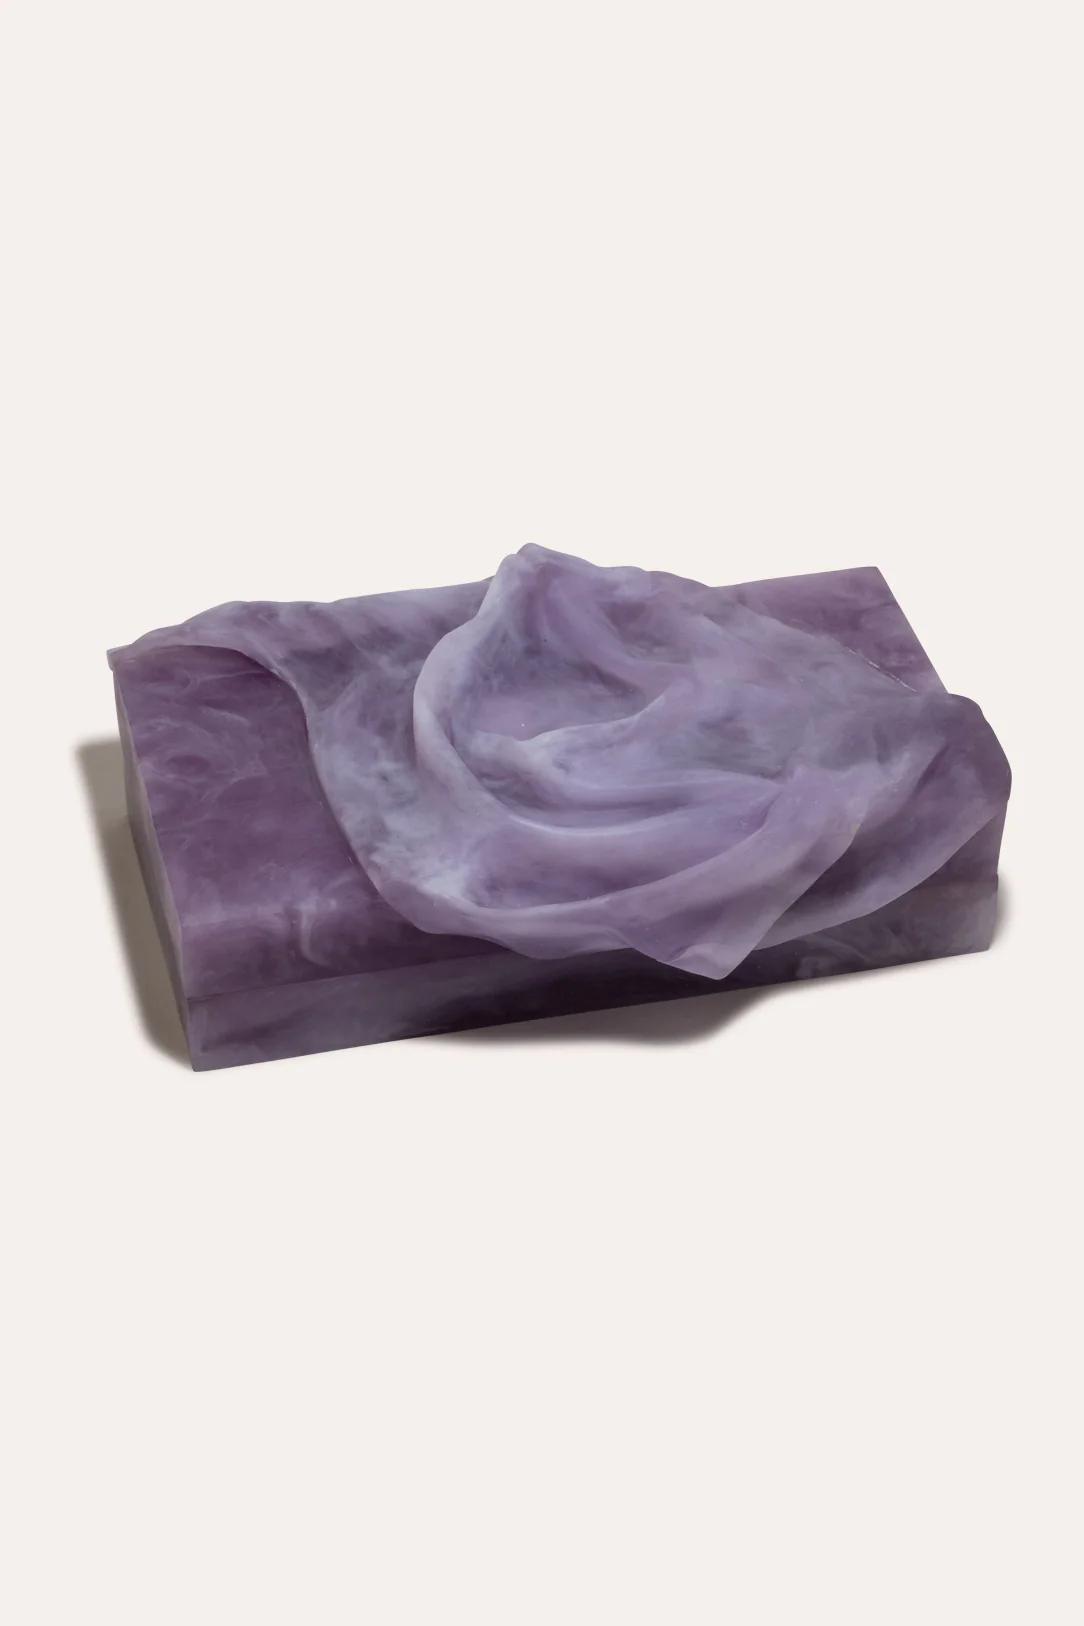 Product Image for Large Jewelry Box, Matte Lilac